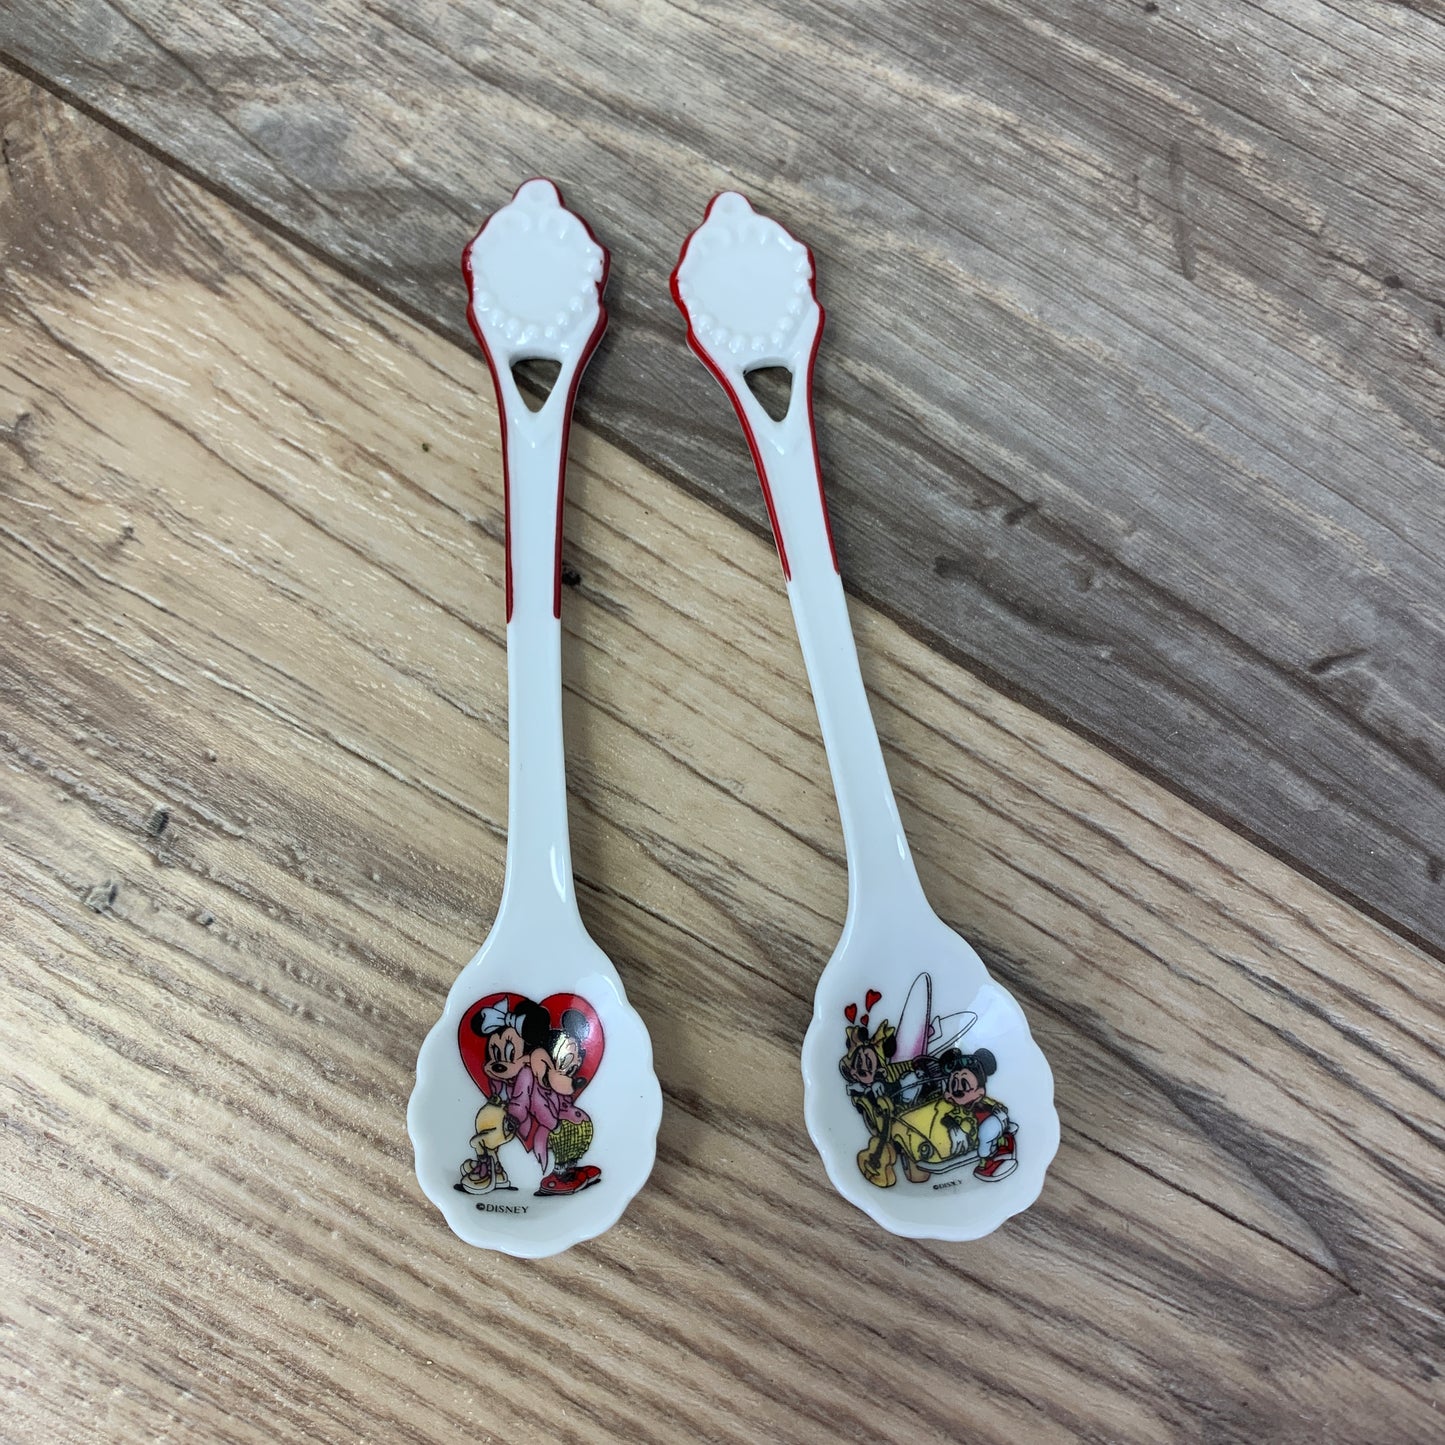 Mickey and Minnie Collectible Disney Porcelain Spoons